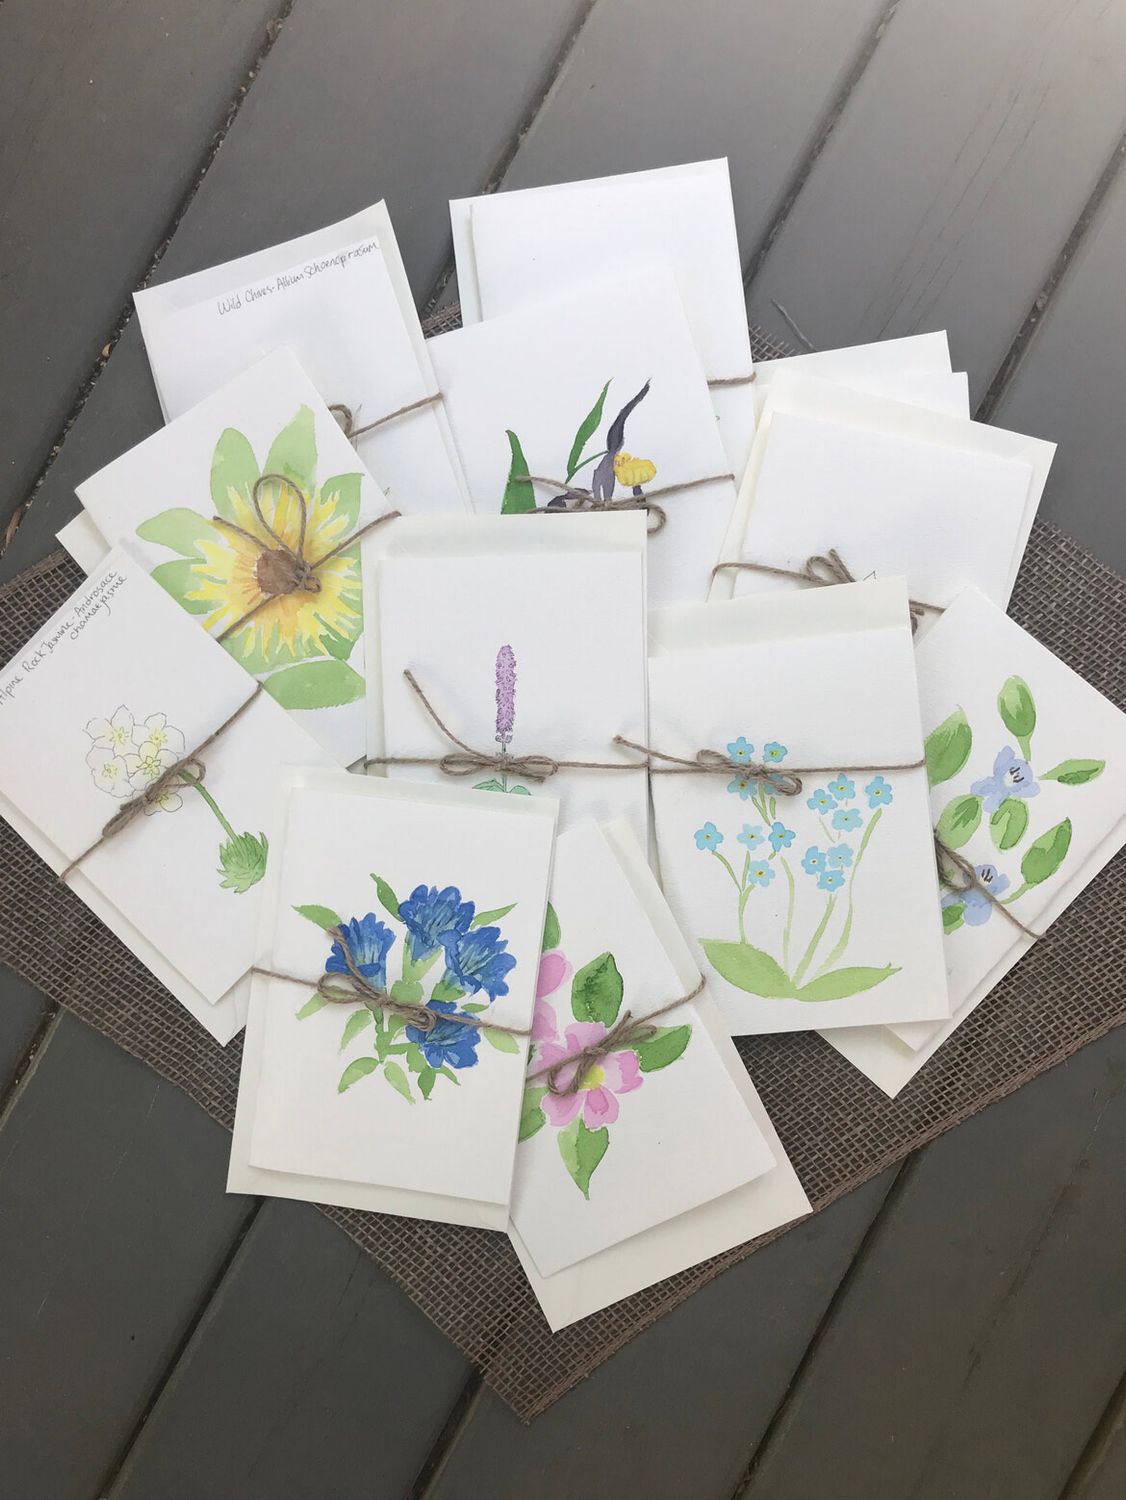 Hand Painted Cards - Mini